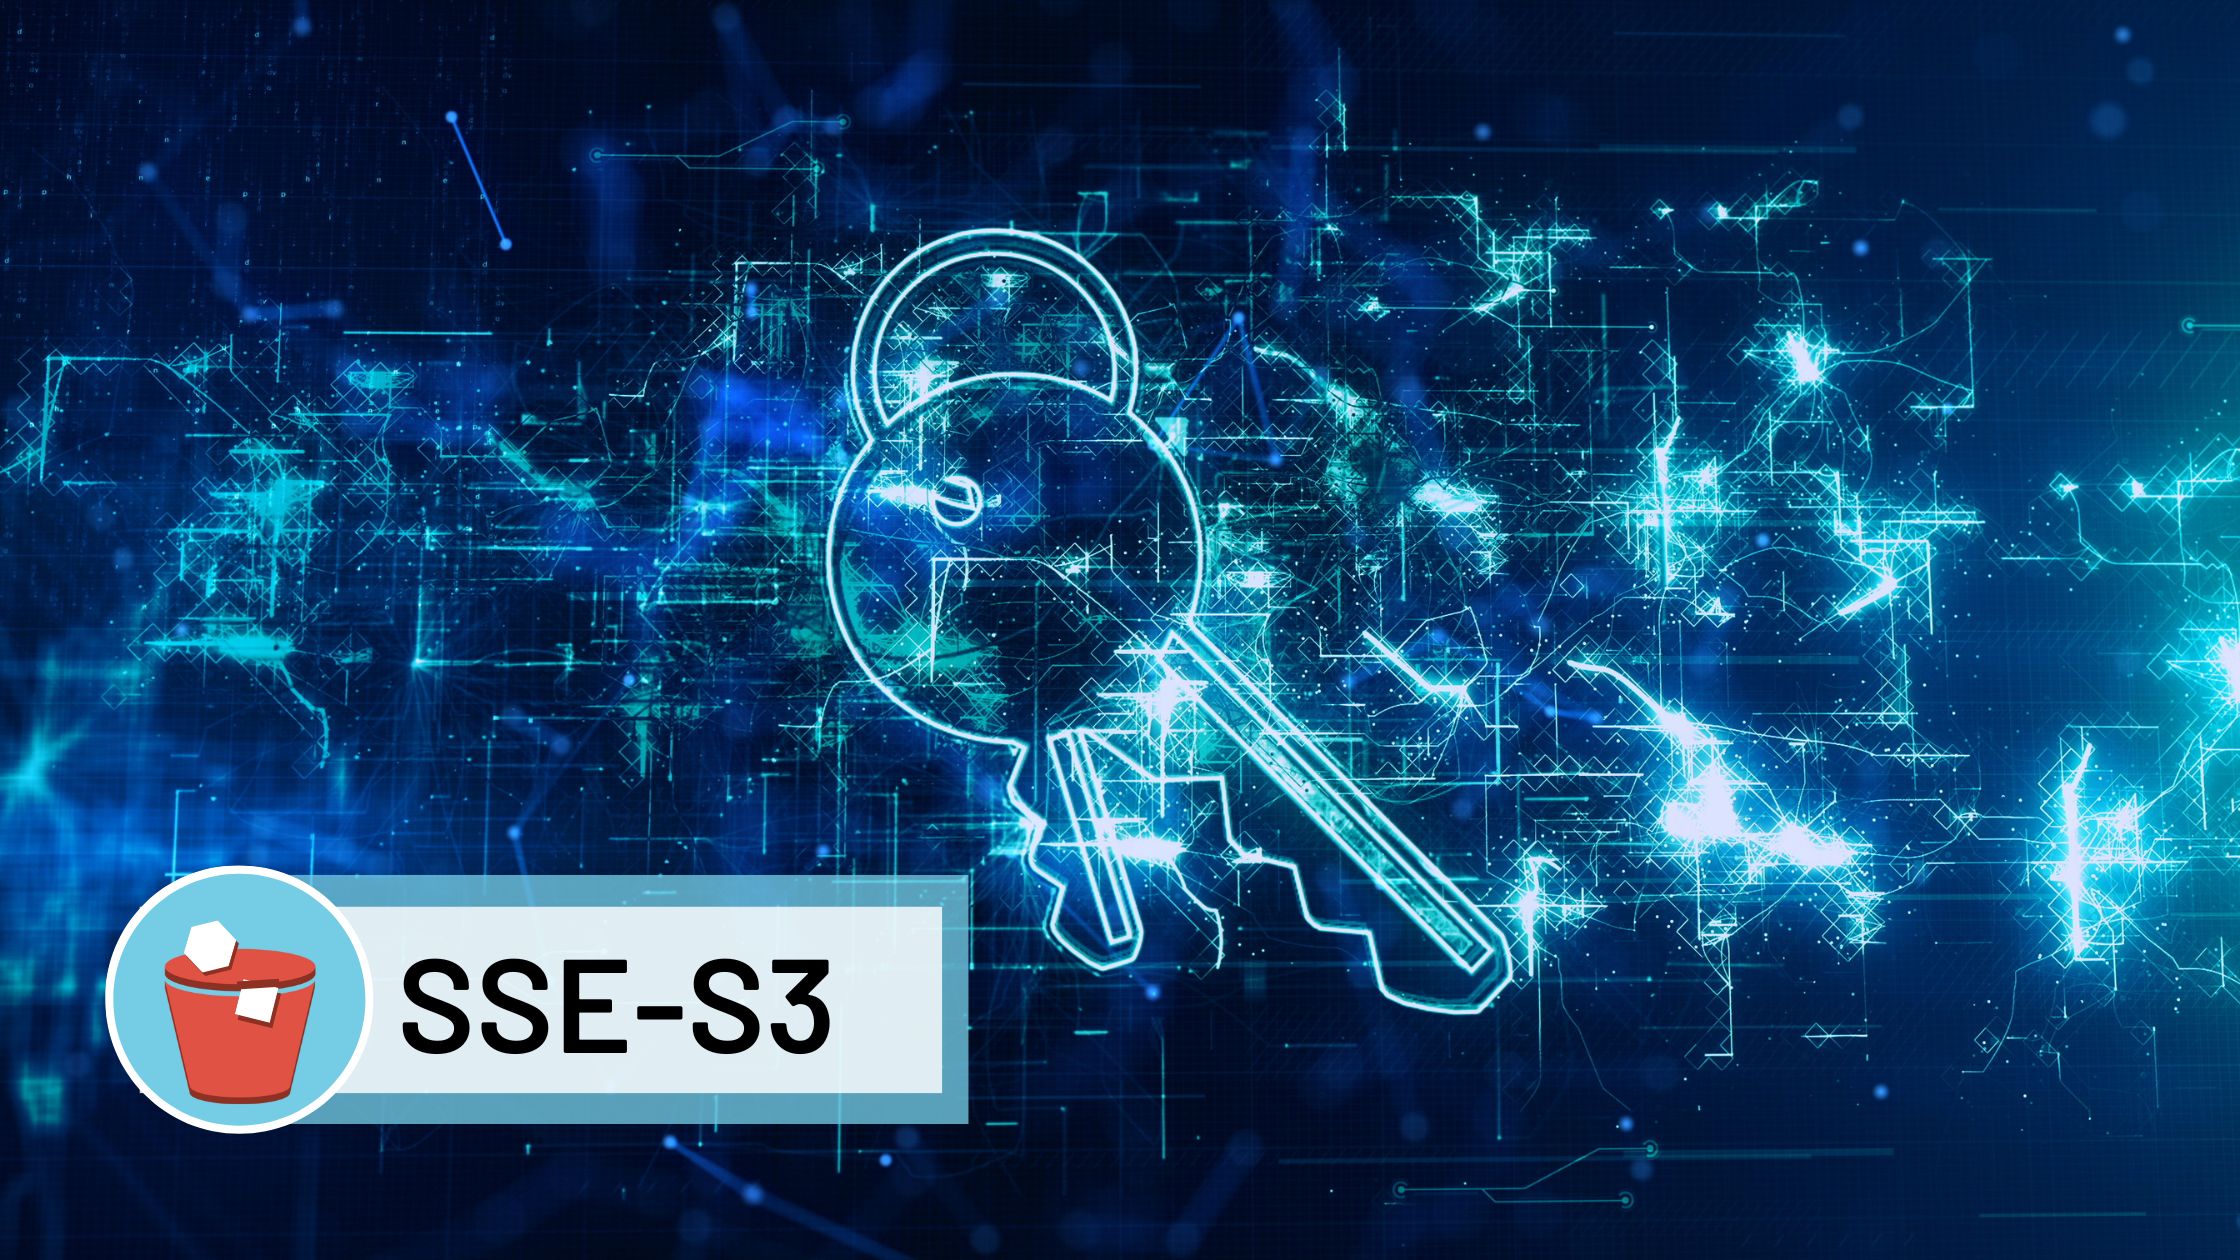 S3 automatically applies server-side encryption (SSE-S3) 